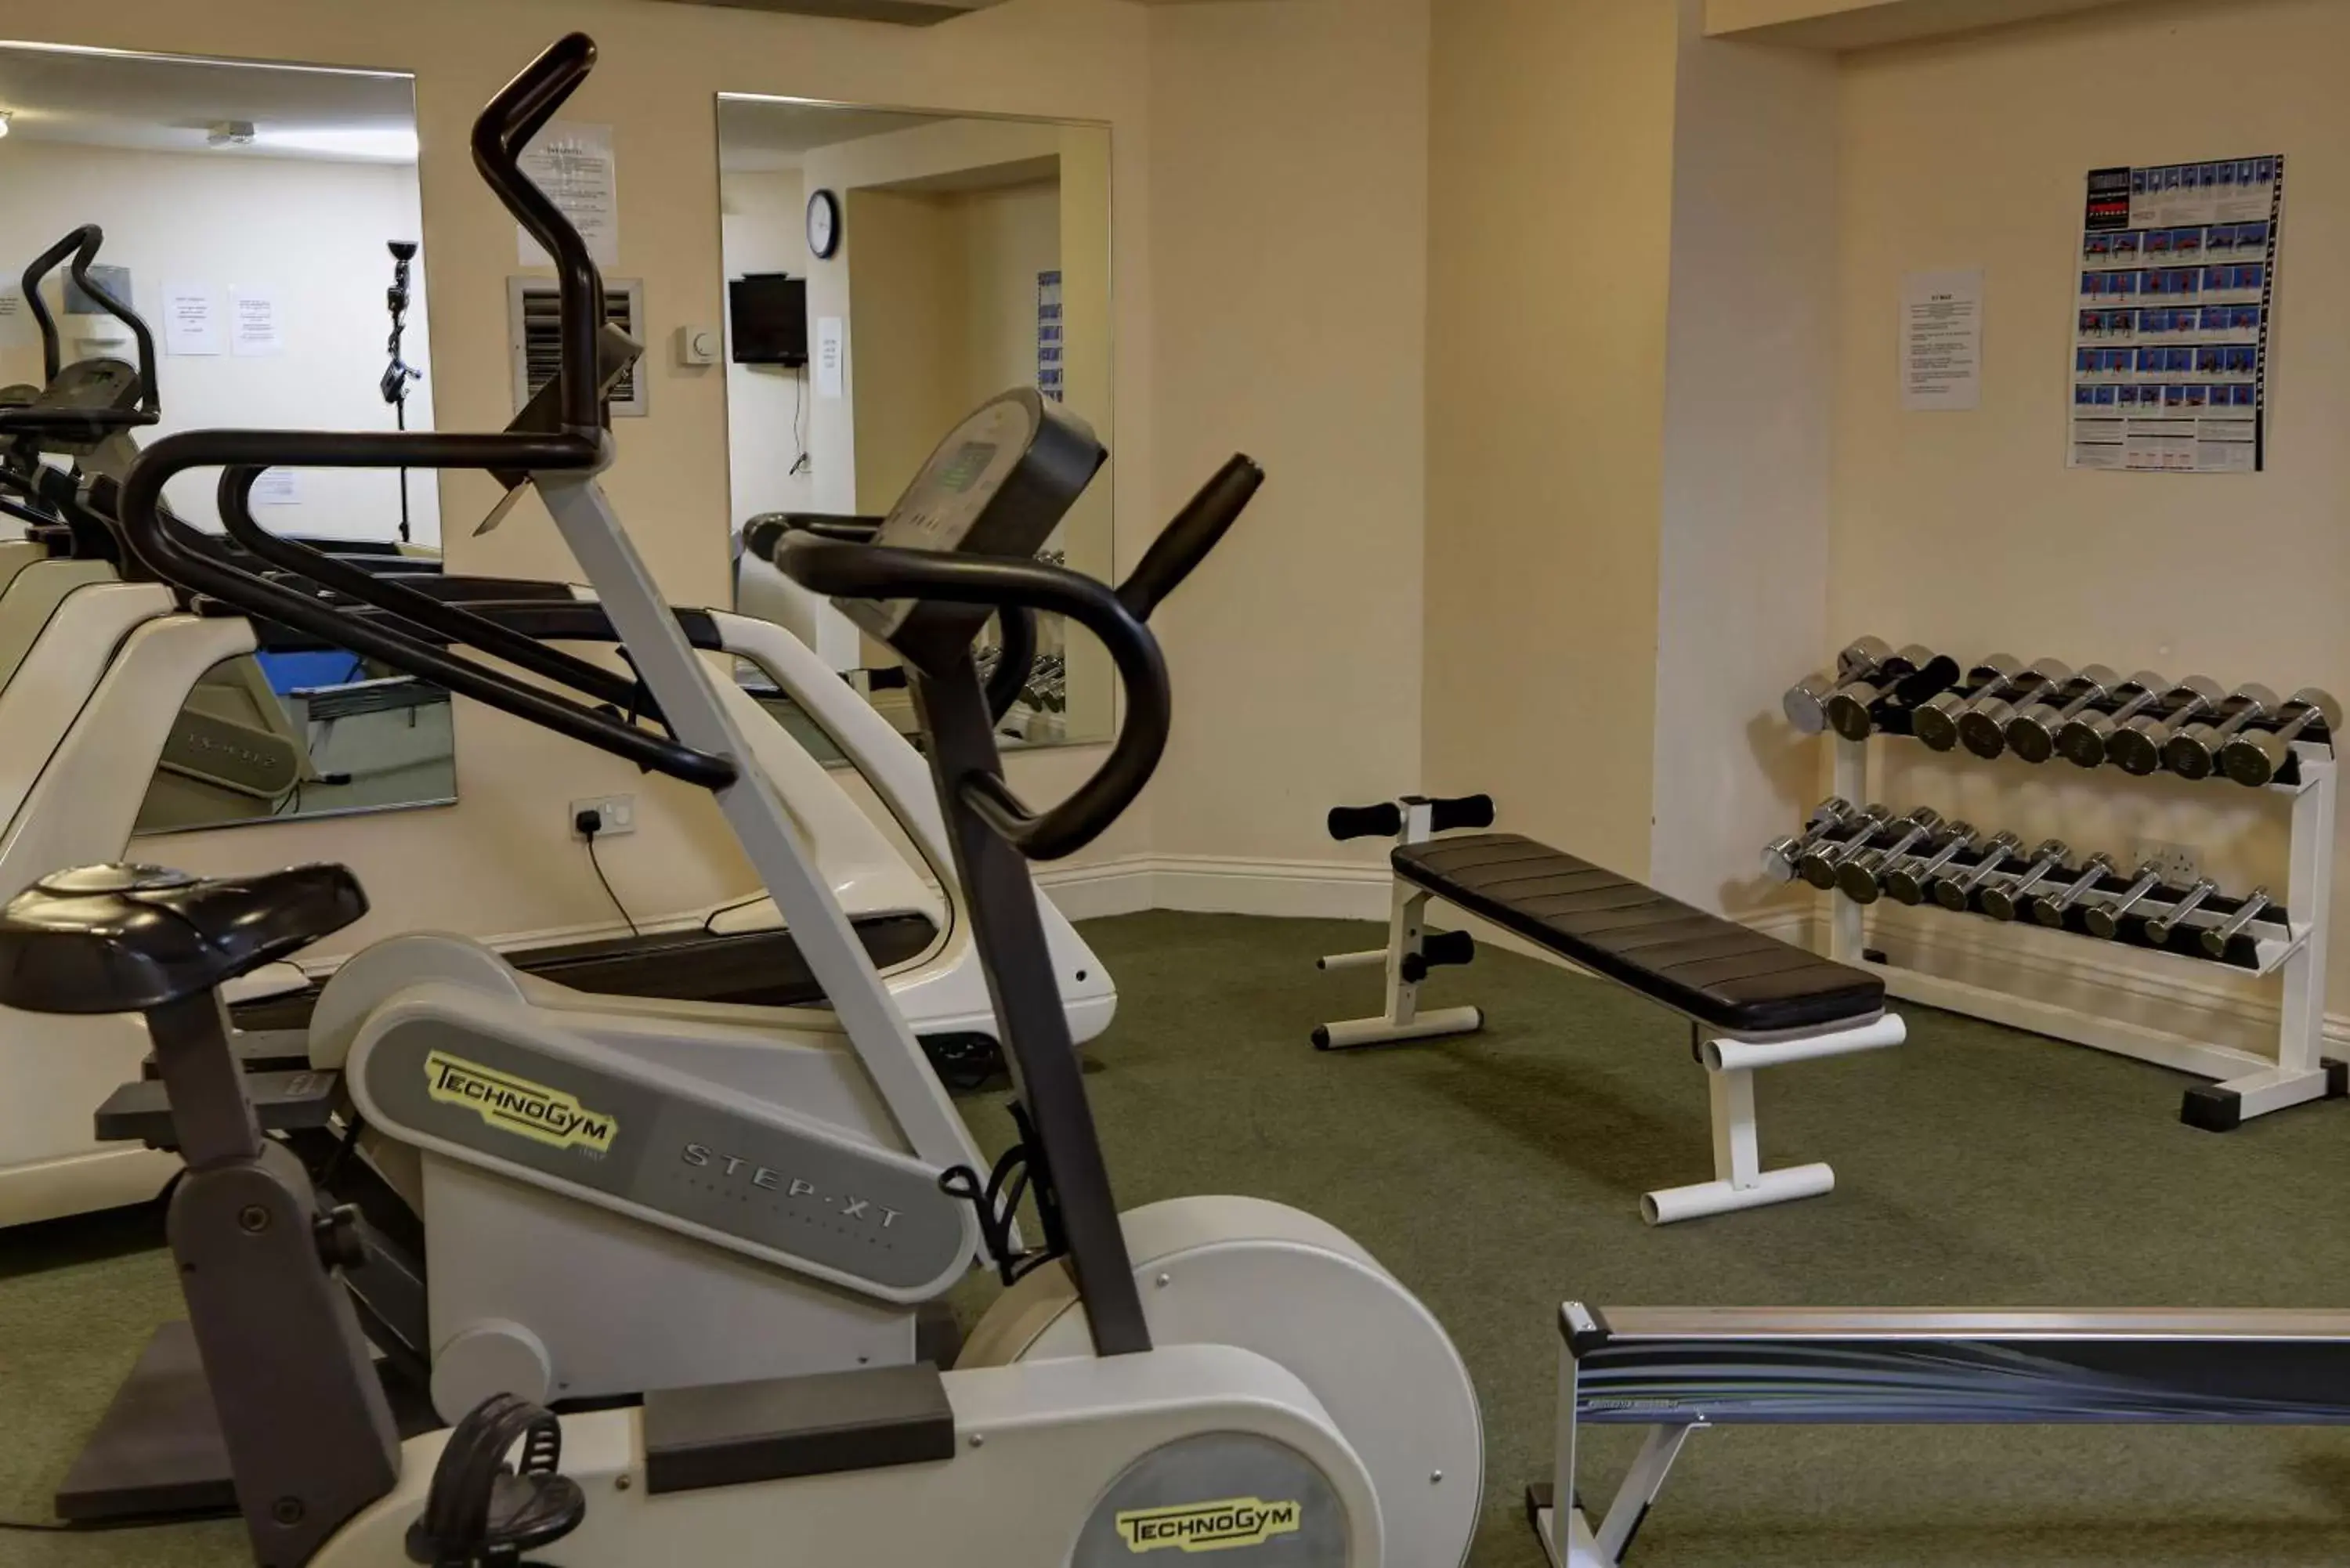 Fitness centre/facilities, Fitness Center/Facilities in Best Western Kilima Hotel